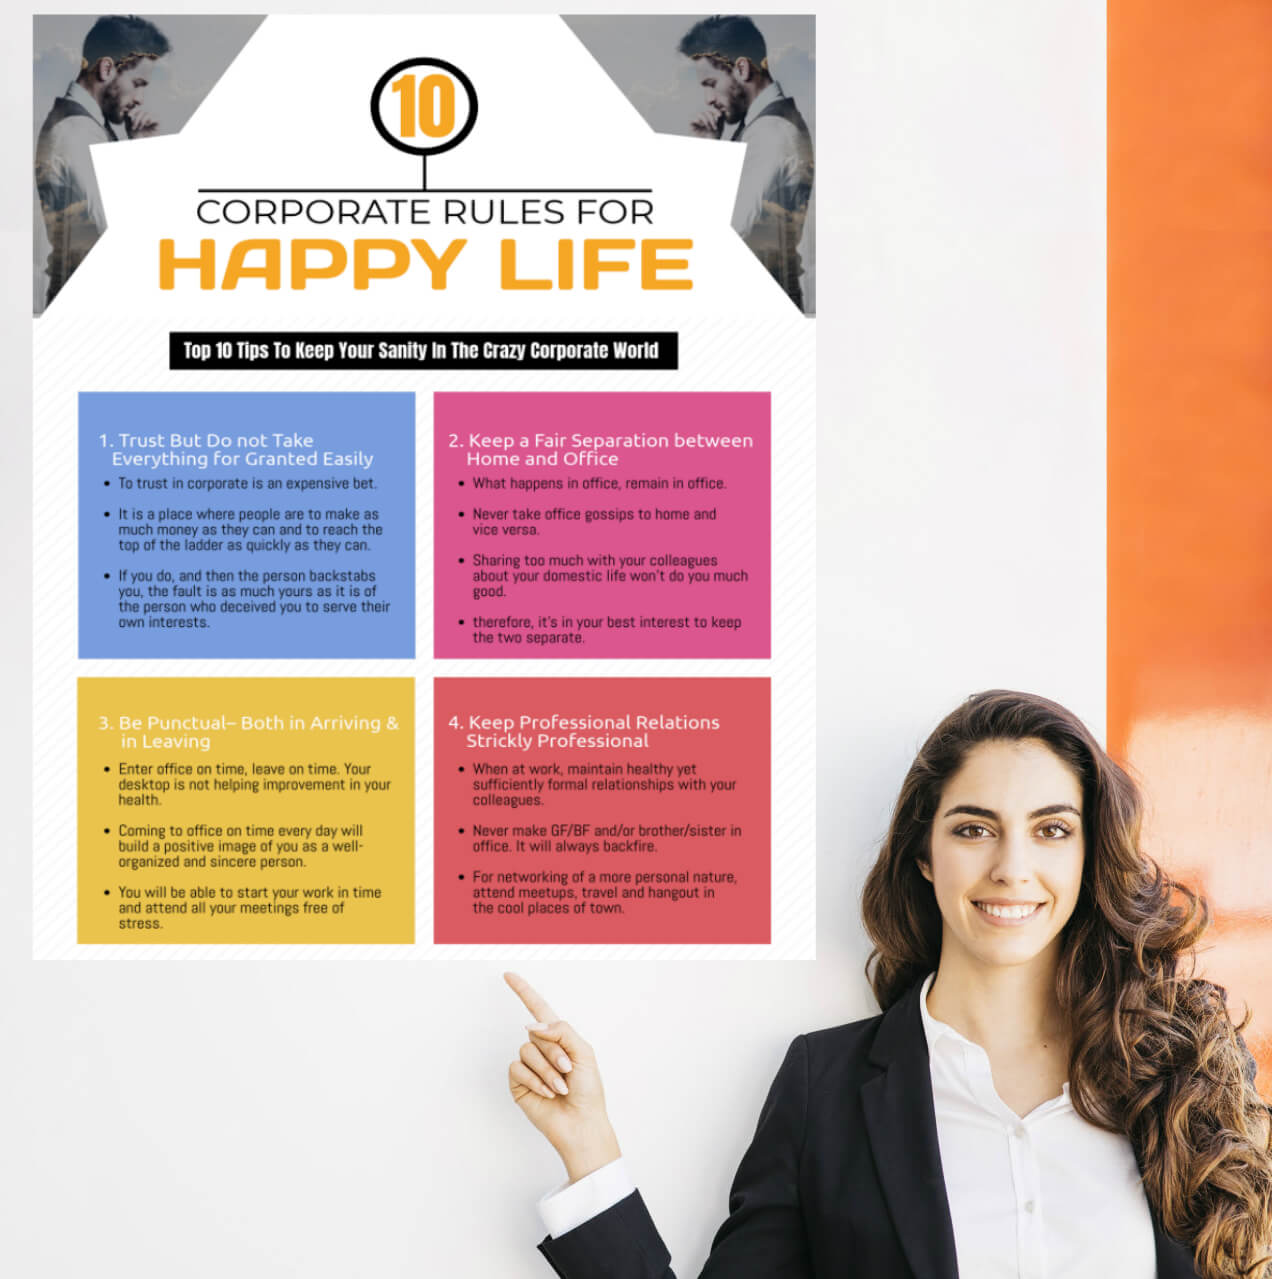 10 Golden Corporate Rules for Happy Life